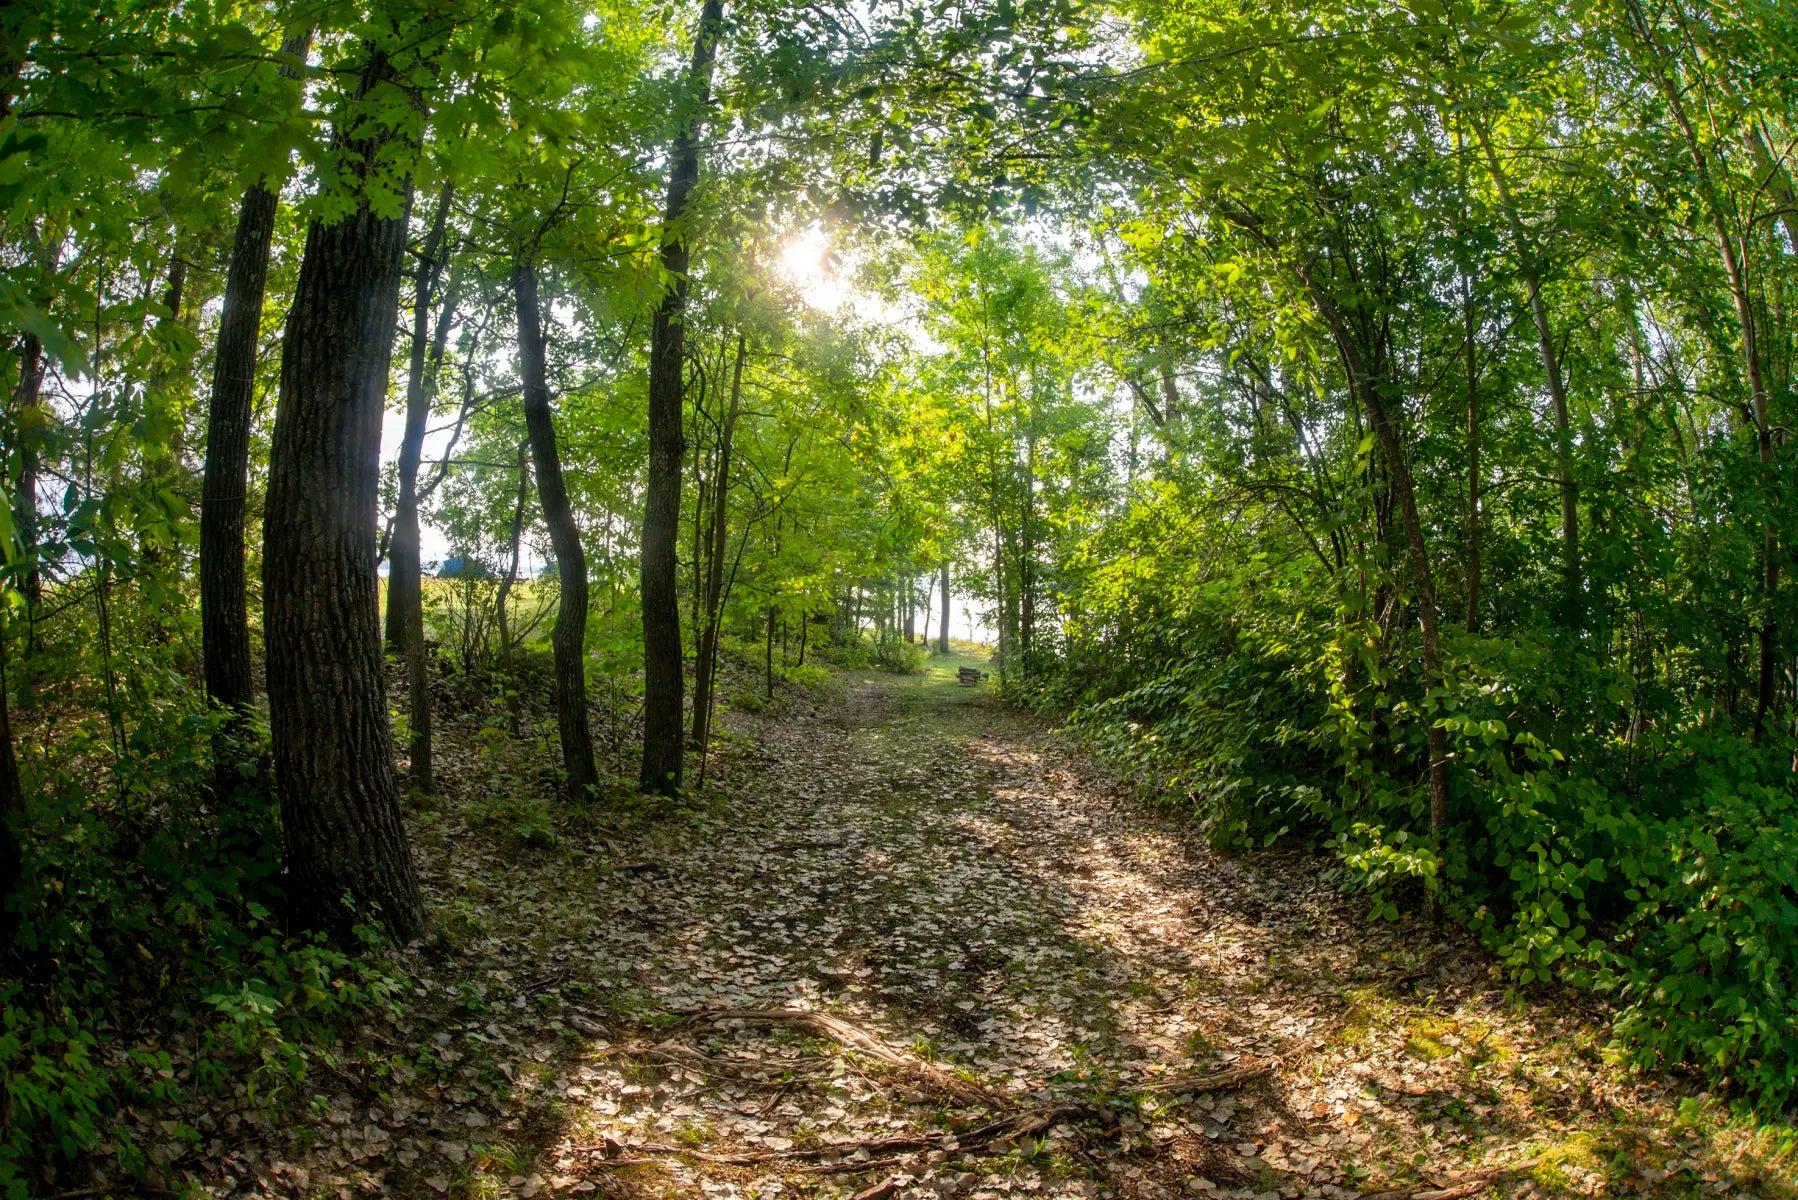 Picture of the a leaf covered trail leading down to the lake with trees on both sides.